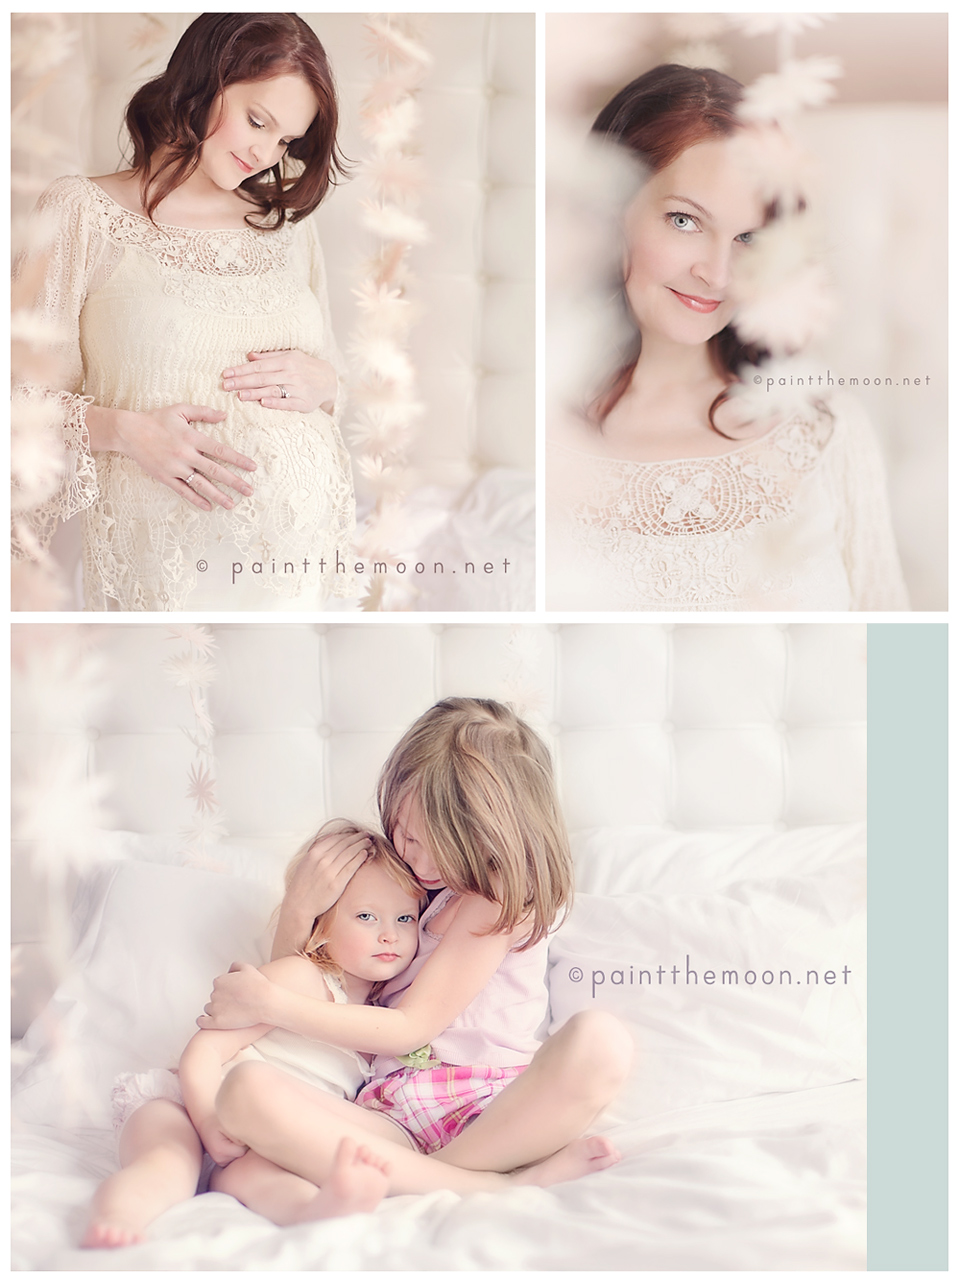 Maternity Photography | Soft, Indoor, Natural Light - Creamy, Film | Paint the Moon Photoshop Actions